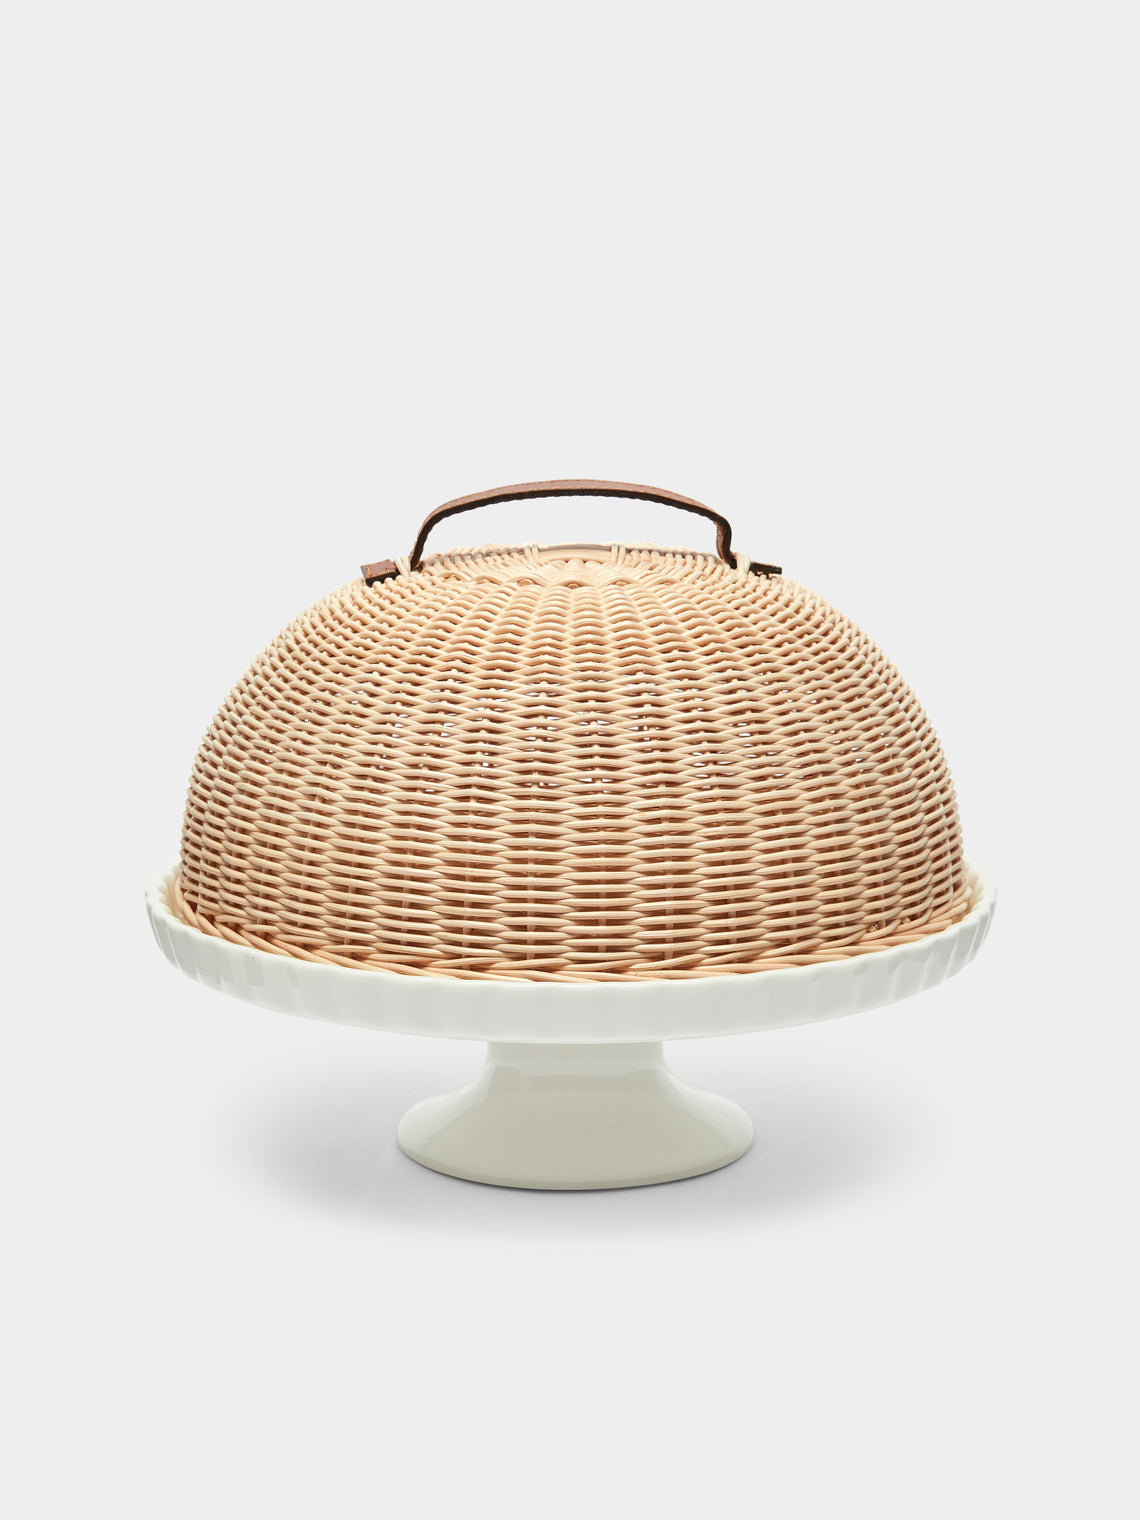 Mila Maurizi - Handwoven Wicker and Ceramic Domed Cake Stand -  - ABASK - 